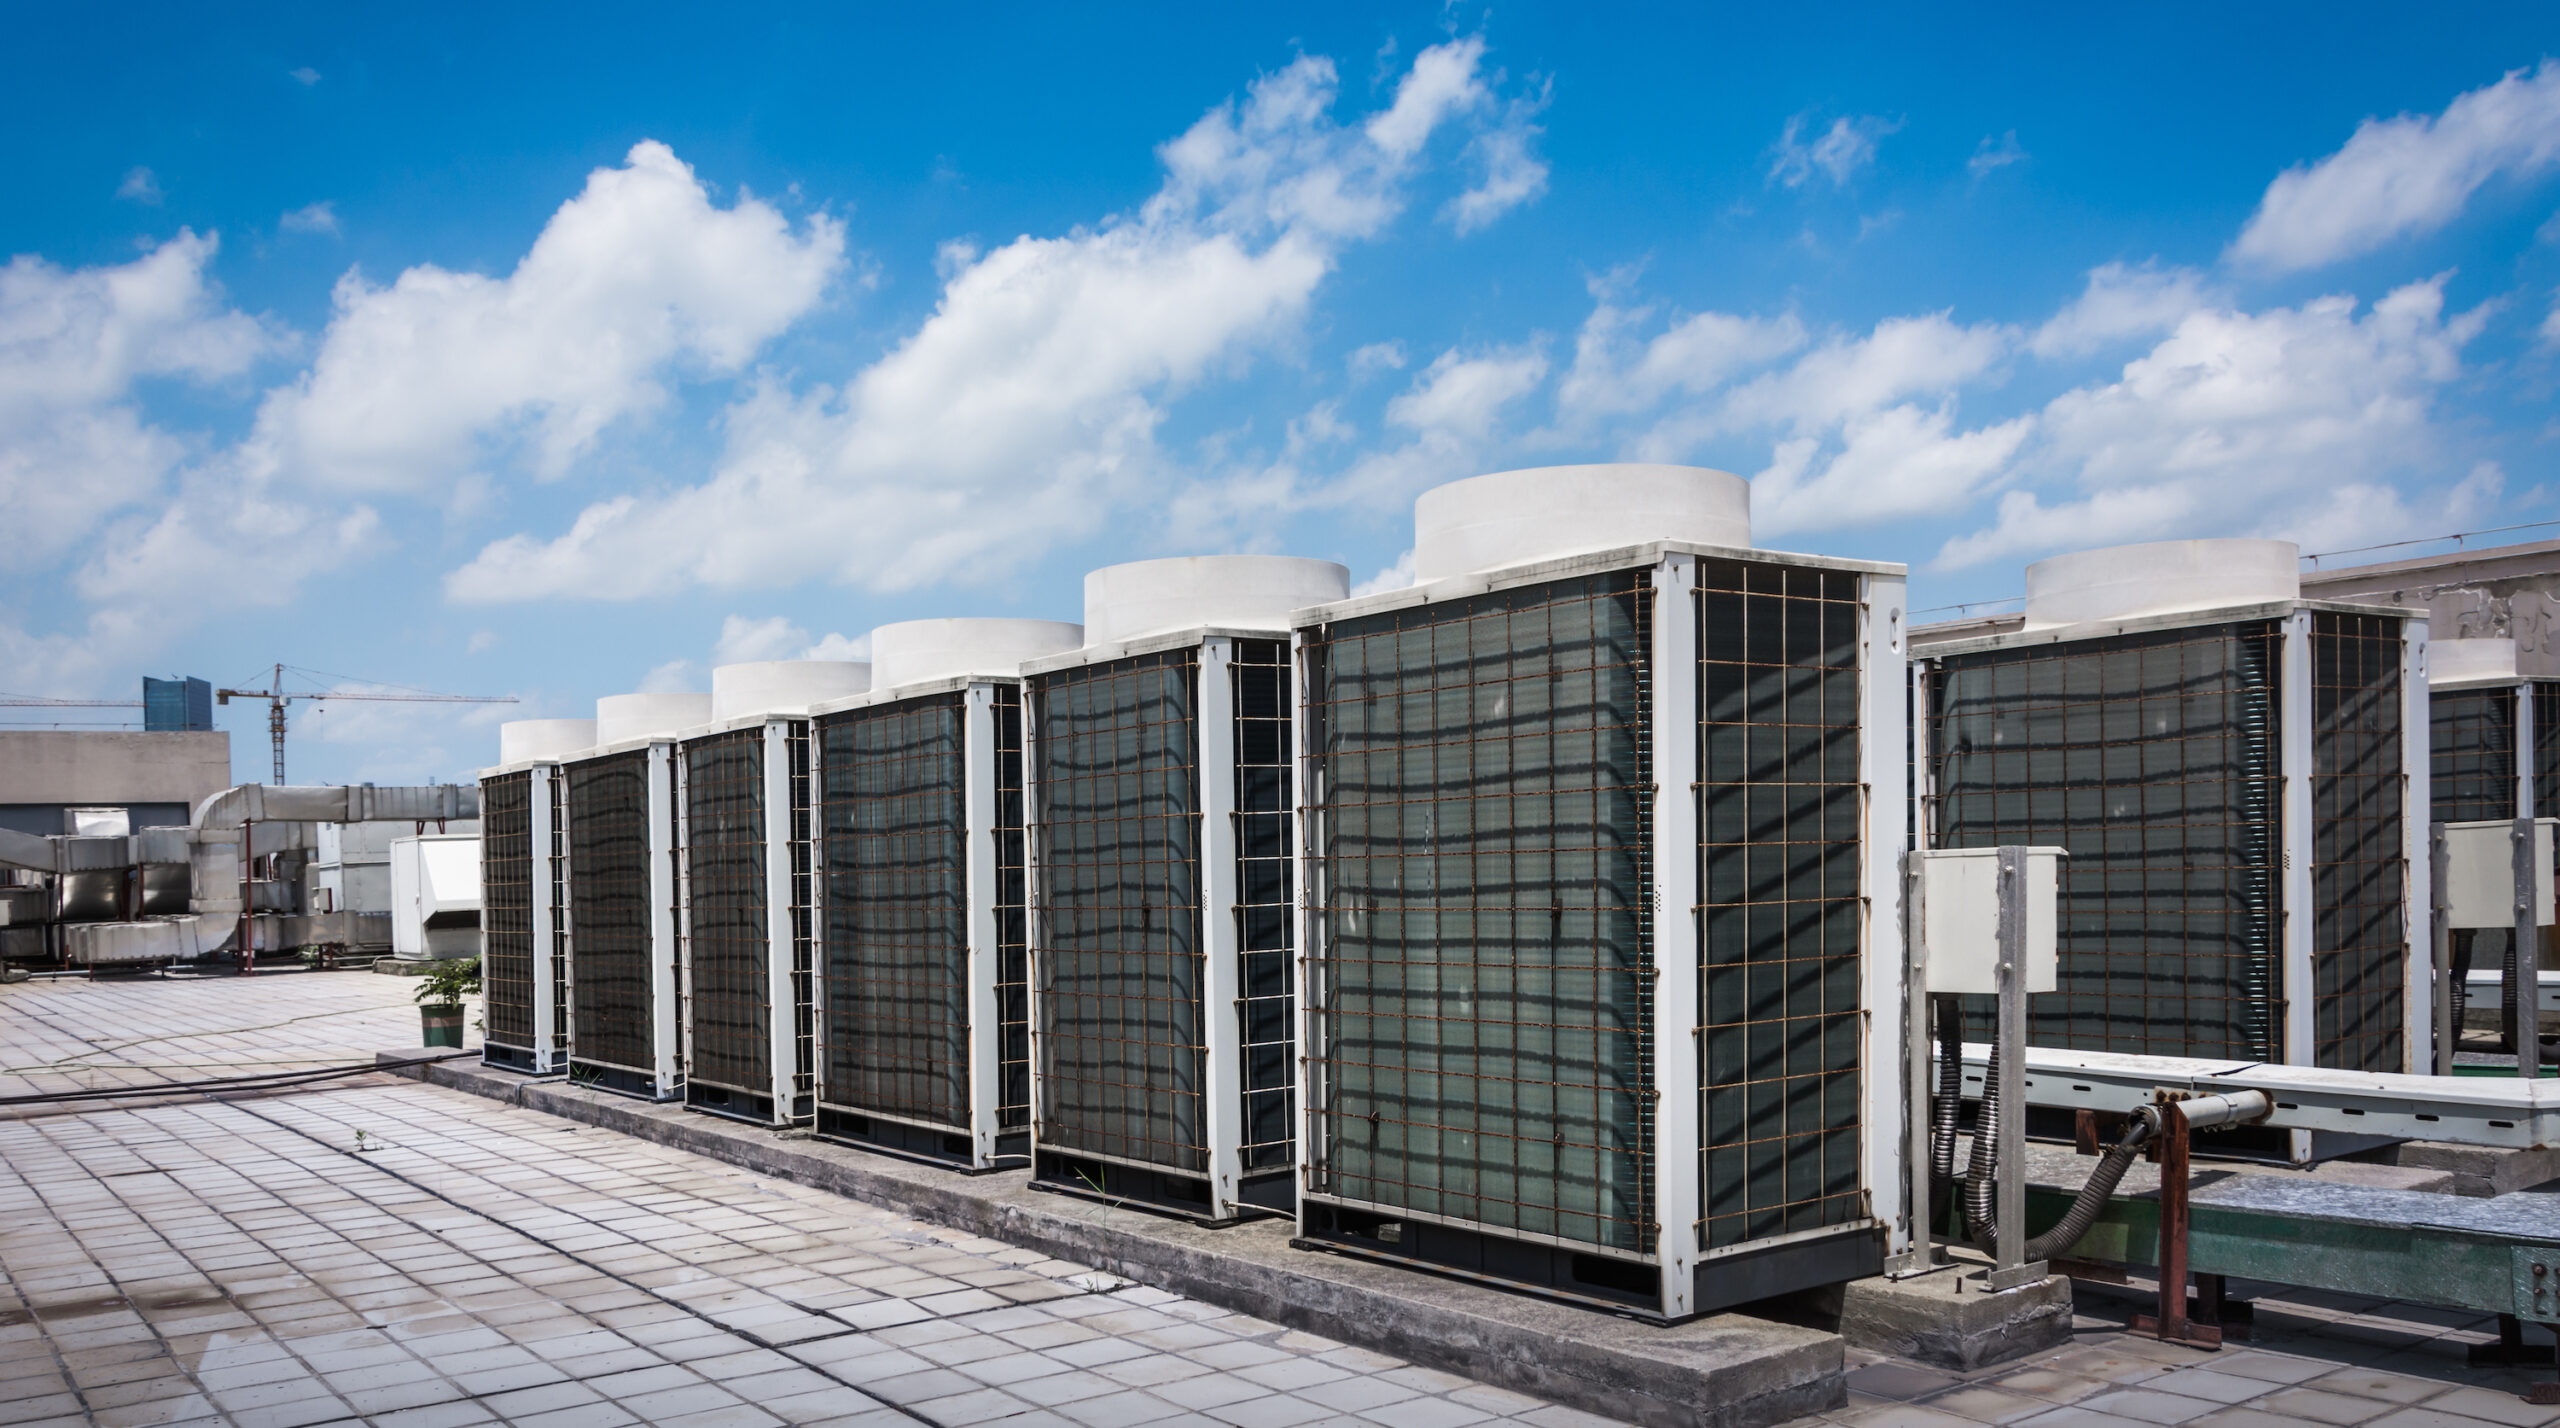 Square Air Conditioning Unit On The Roof With A Round Fan. In The Background Gradually Receding Other Units That Are Out Of Focus. On The Right Side Light Blue Sky And Commercial Space.